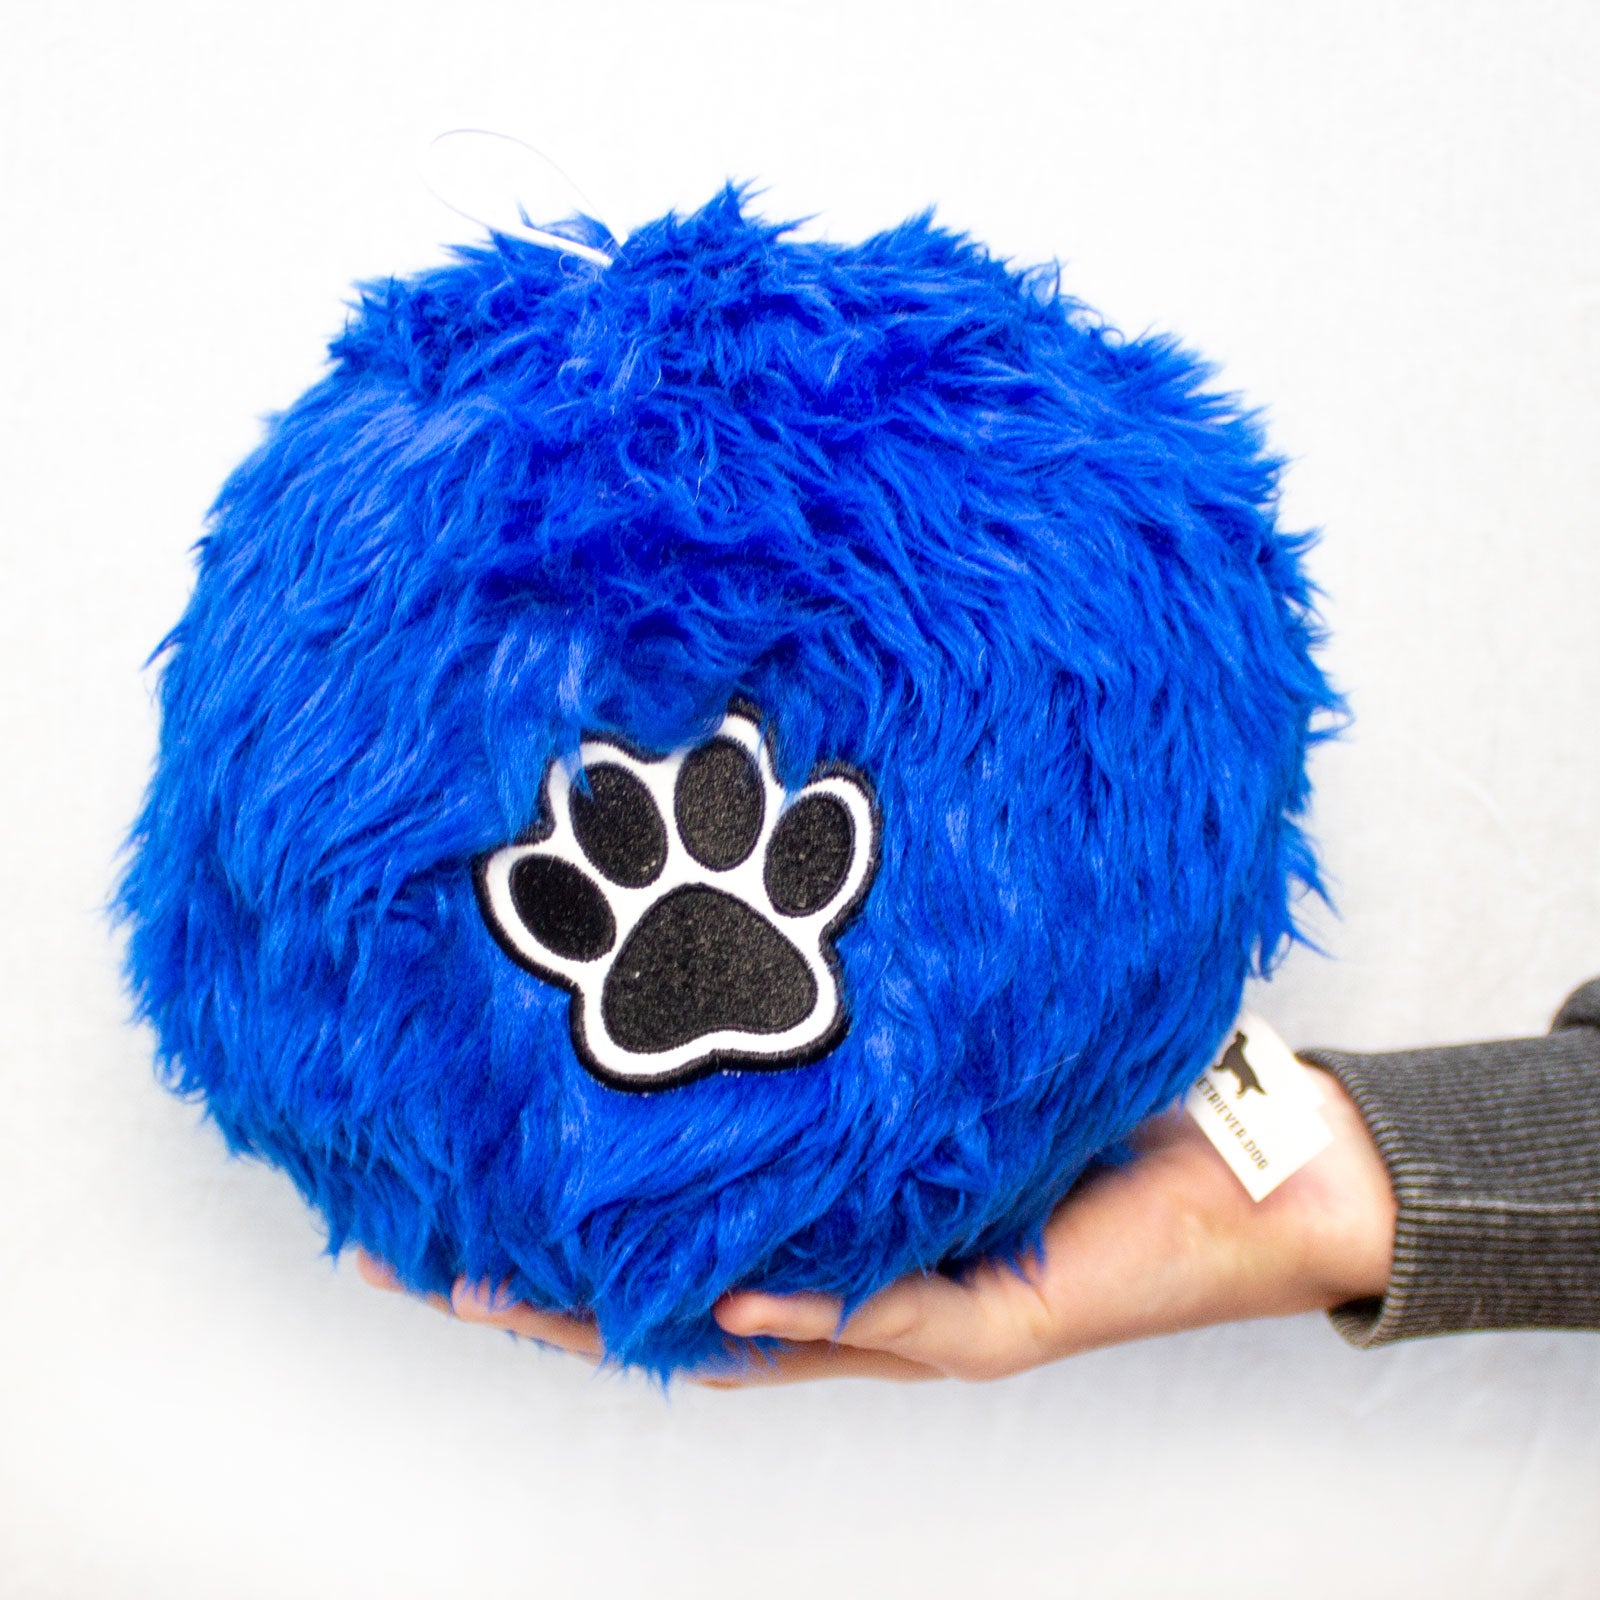 Soft Fluffy Ball For Beagle Dogs - Large Size